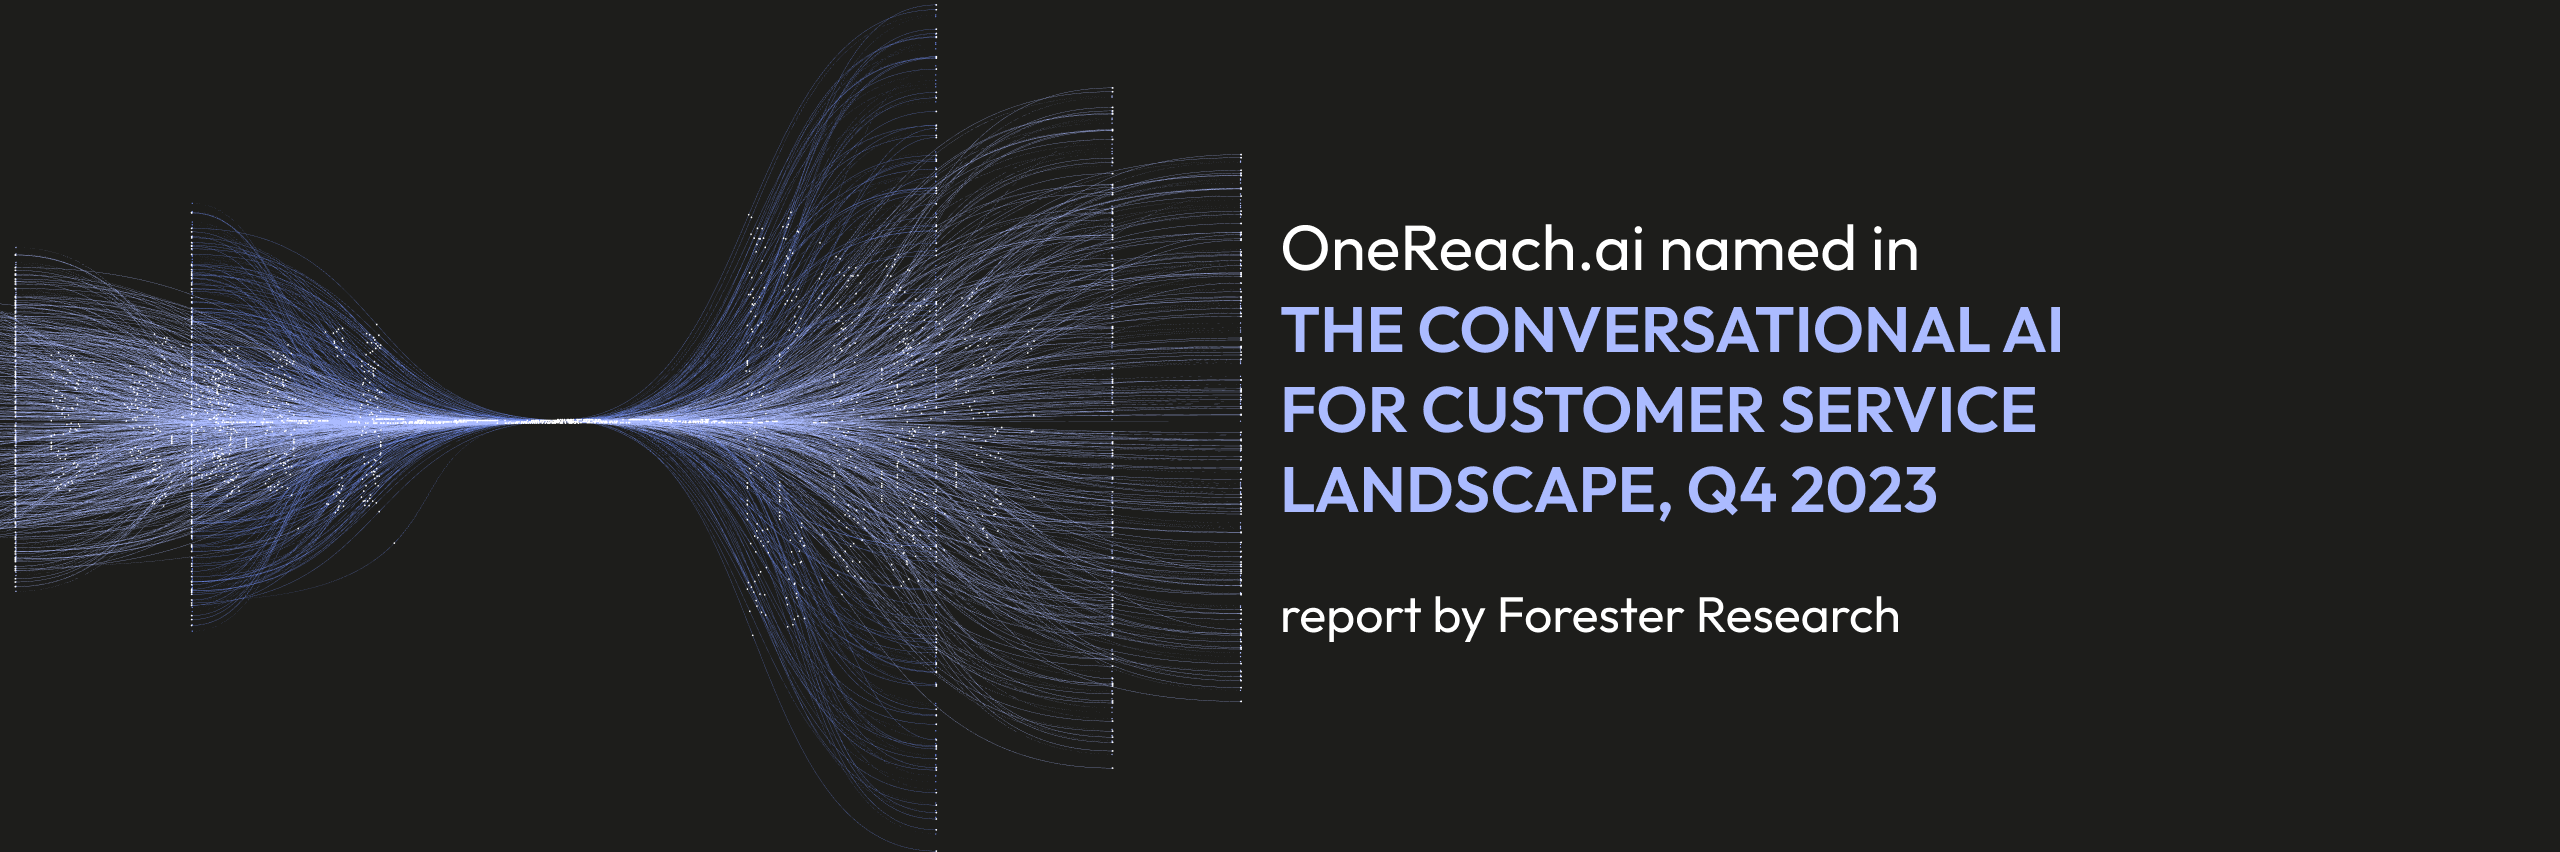 OneReach.ai named in “The Conversational AI for Customer Service Landscape, Q4 2023” report by Forrester Research